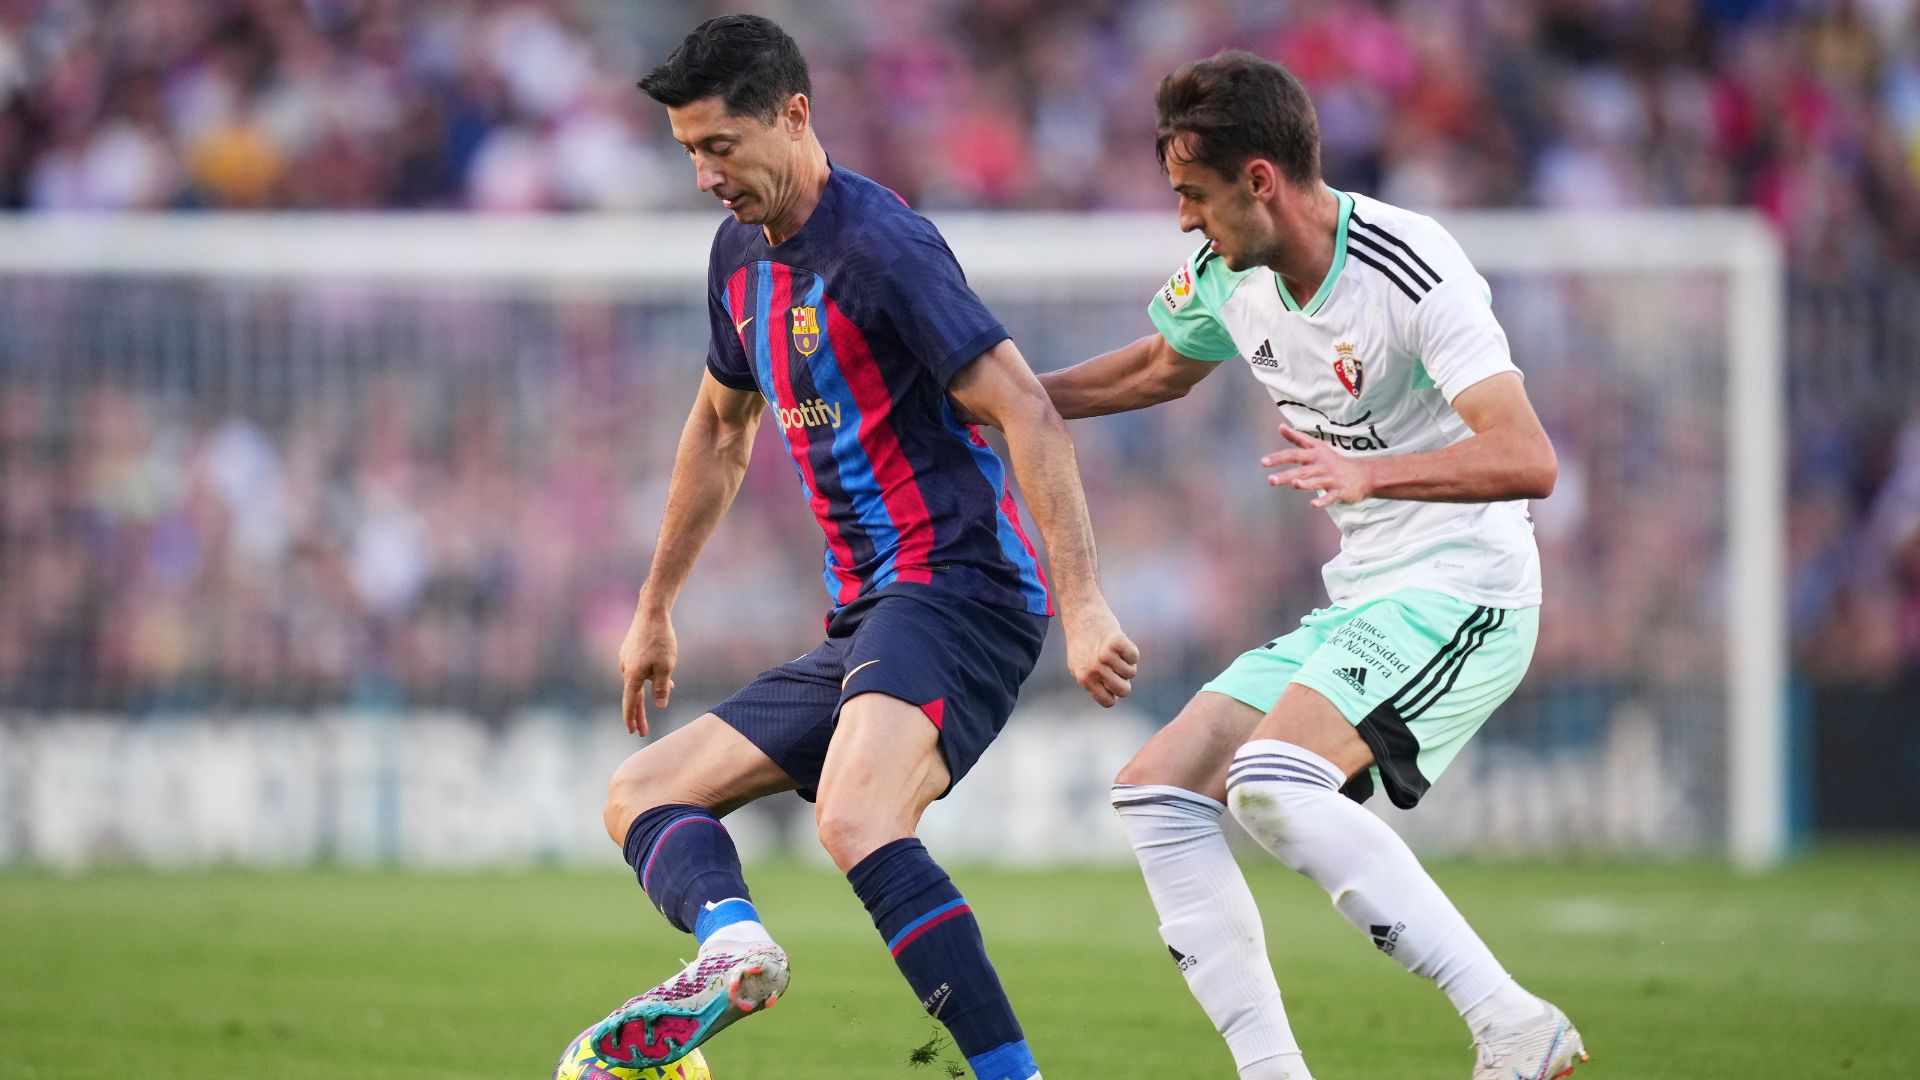 Very complicated game between Barcelona and Osasuna (Credit: Getty Images)